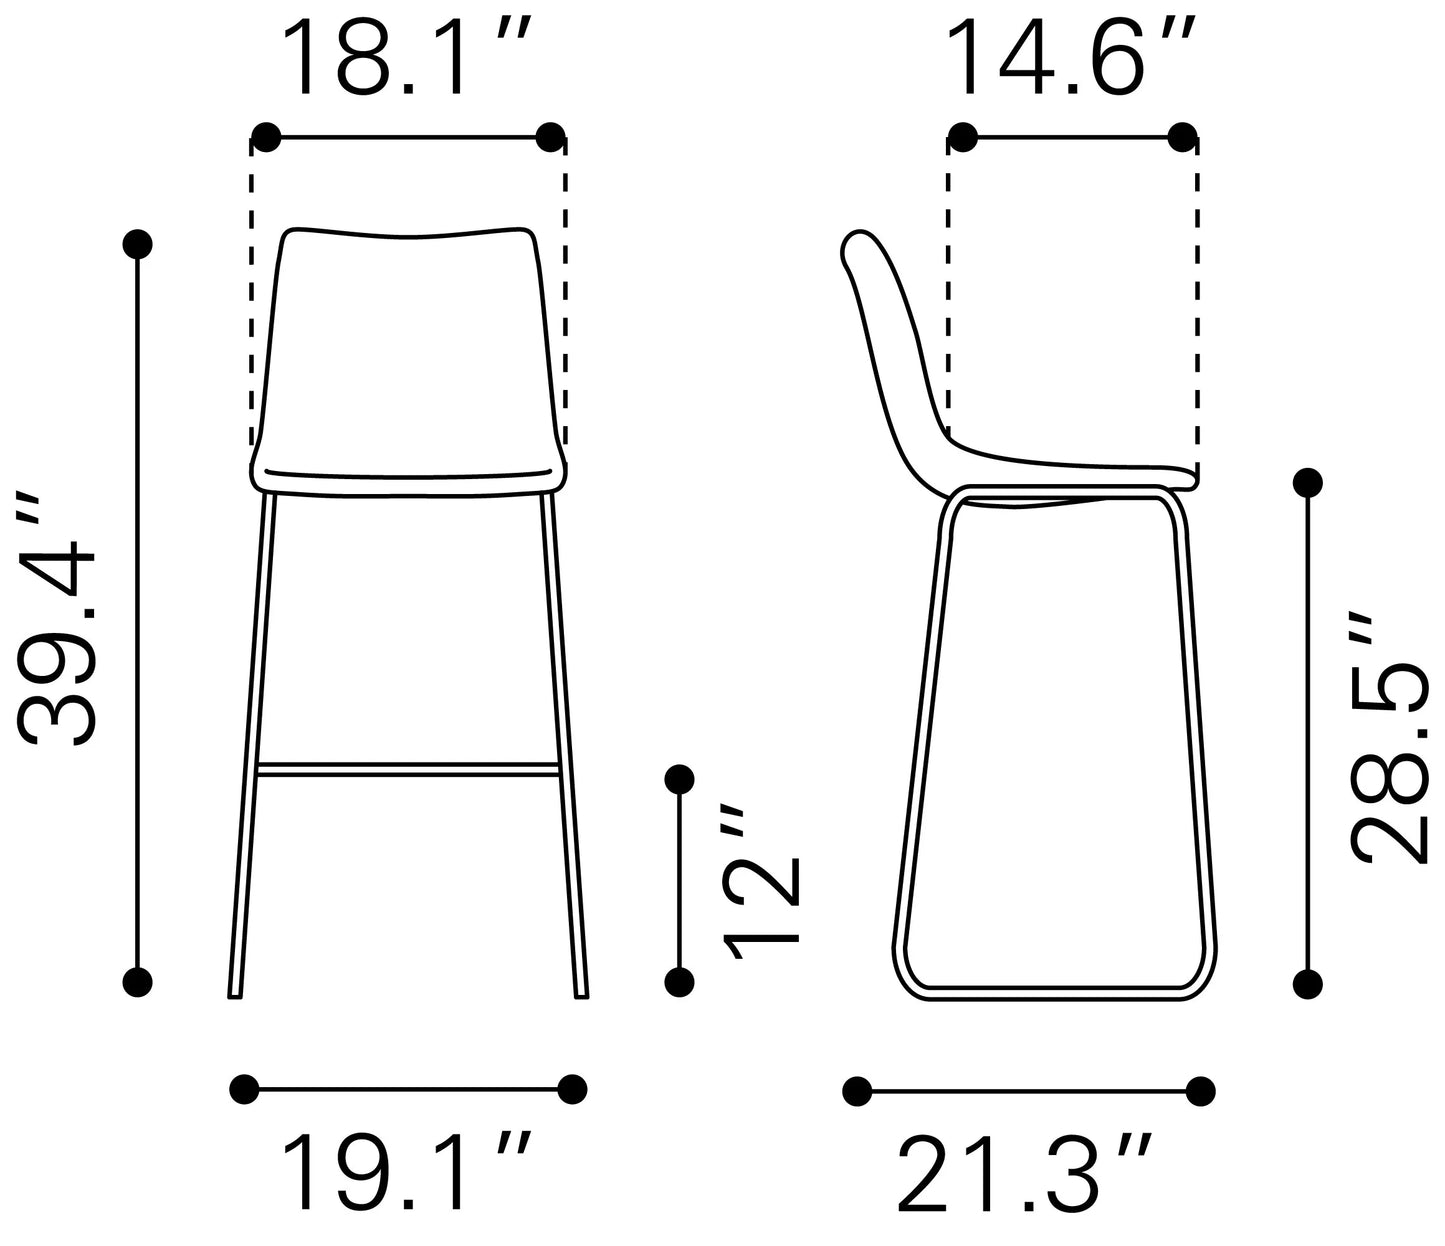 Dimensions of Augusta Stool 